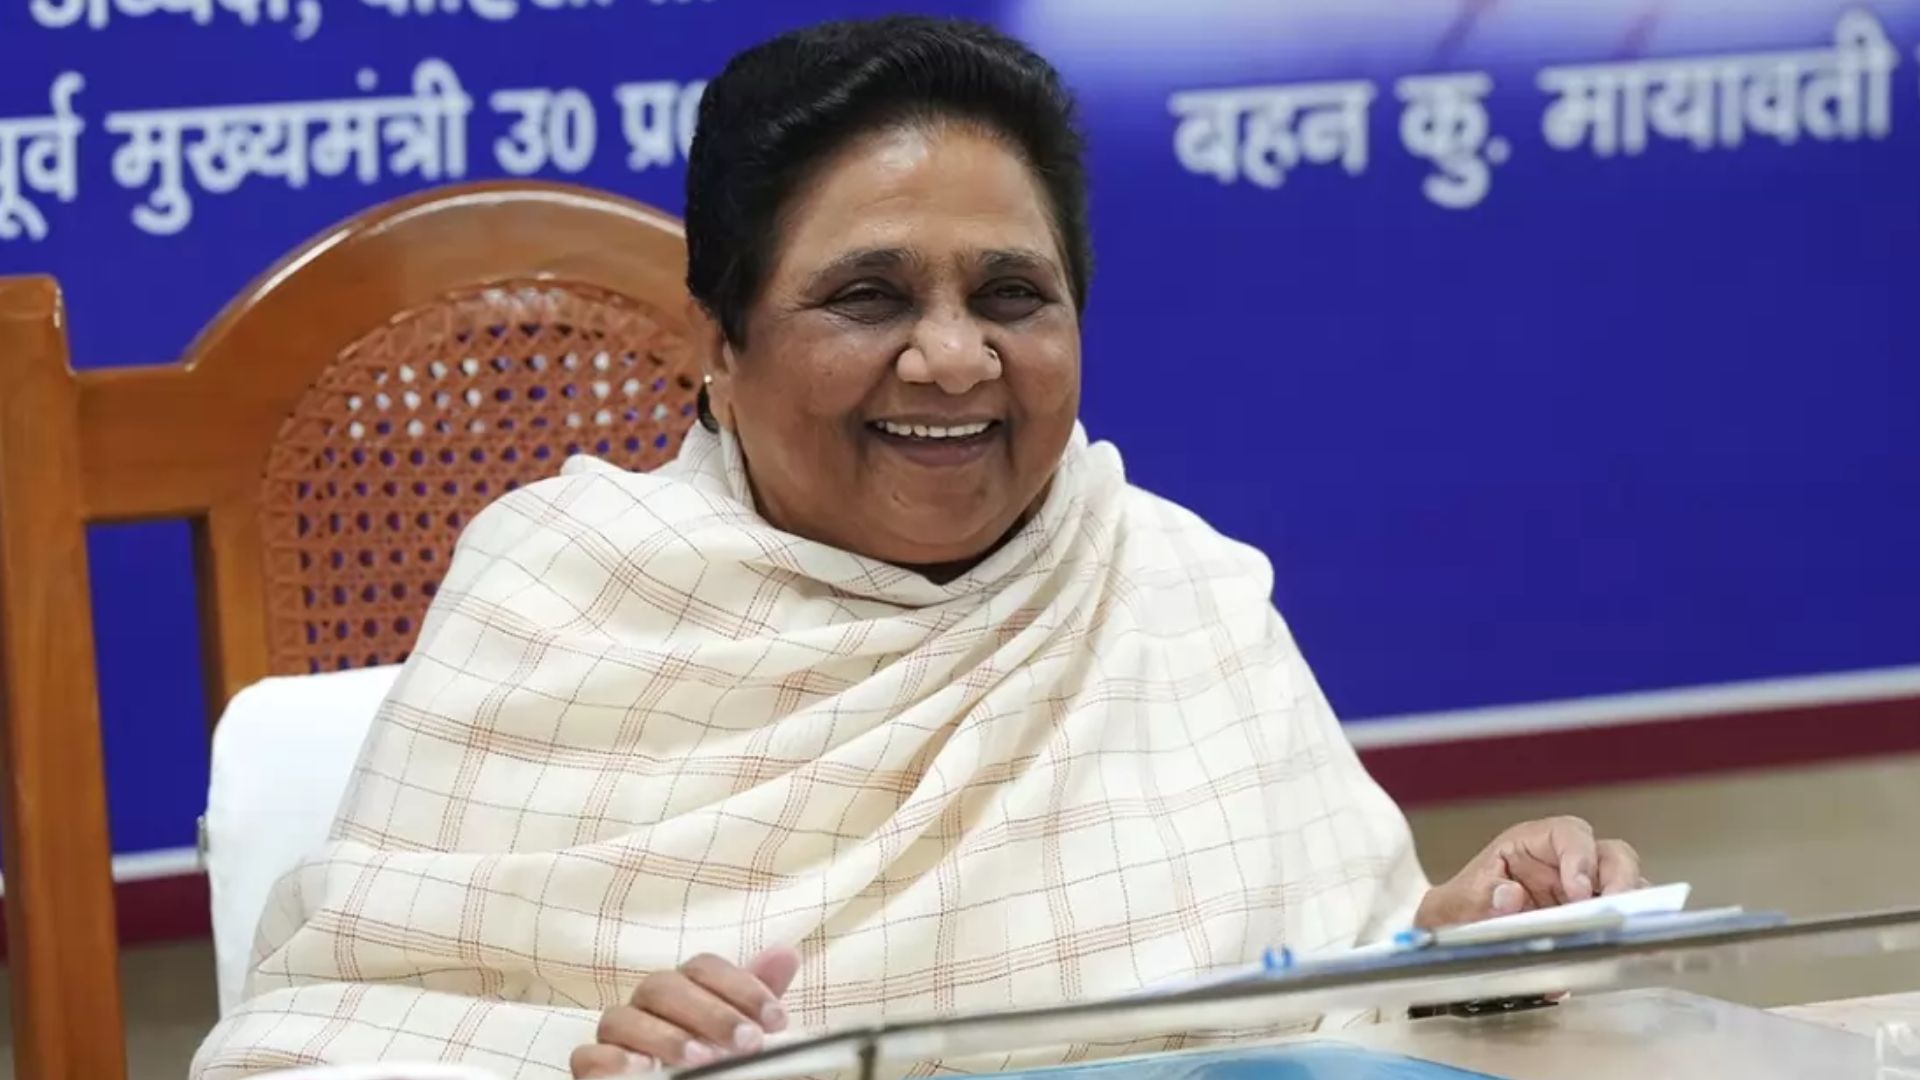 BSP Chief Mayawati: Yet to Decide Whether to Attend Ayodhya’s Ram Temple Event